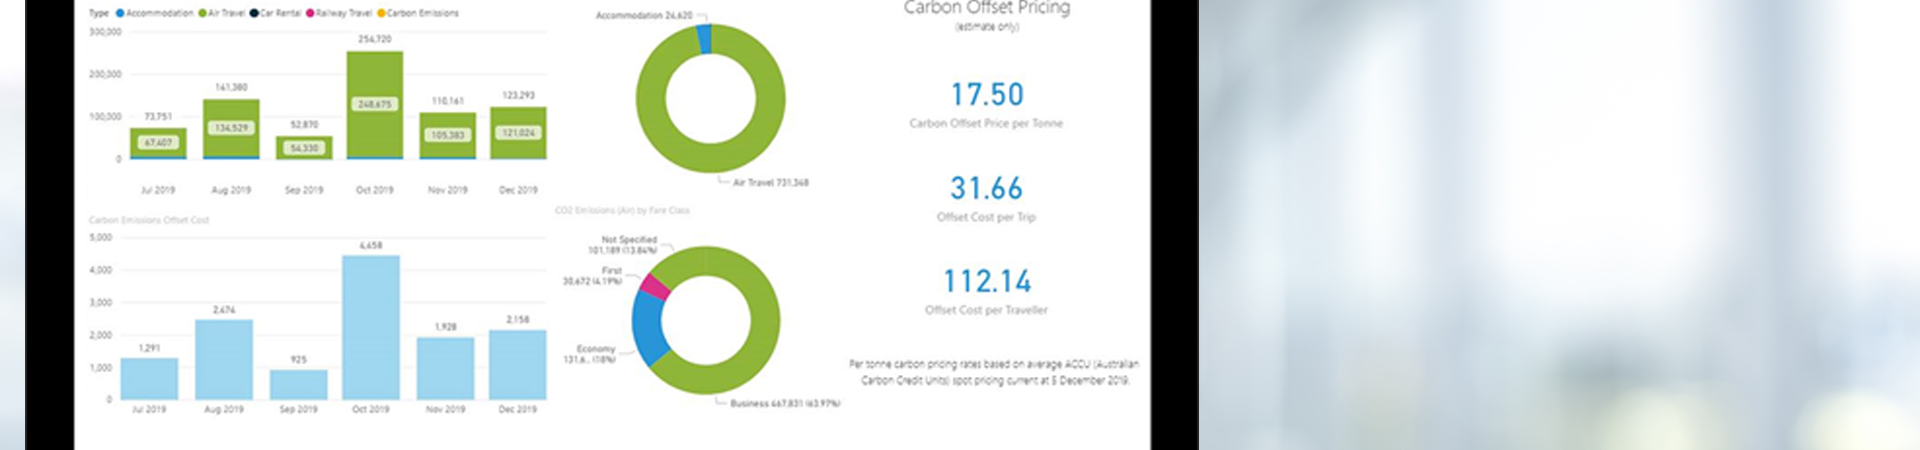 Sustainable travel carbon offset reporting screen